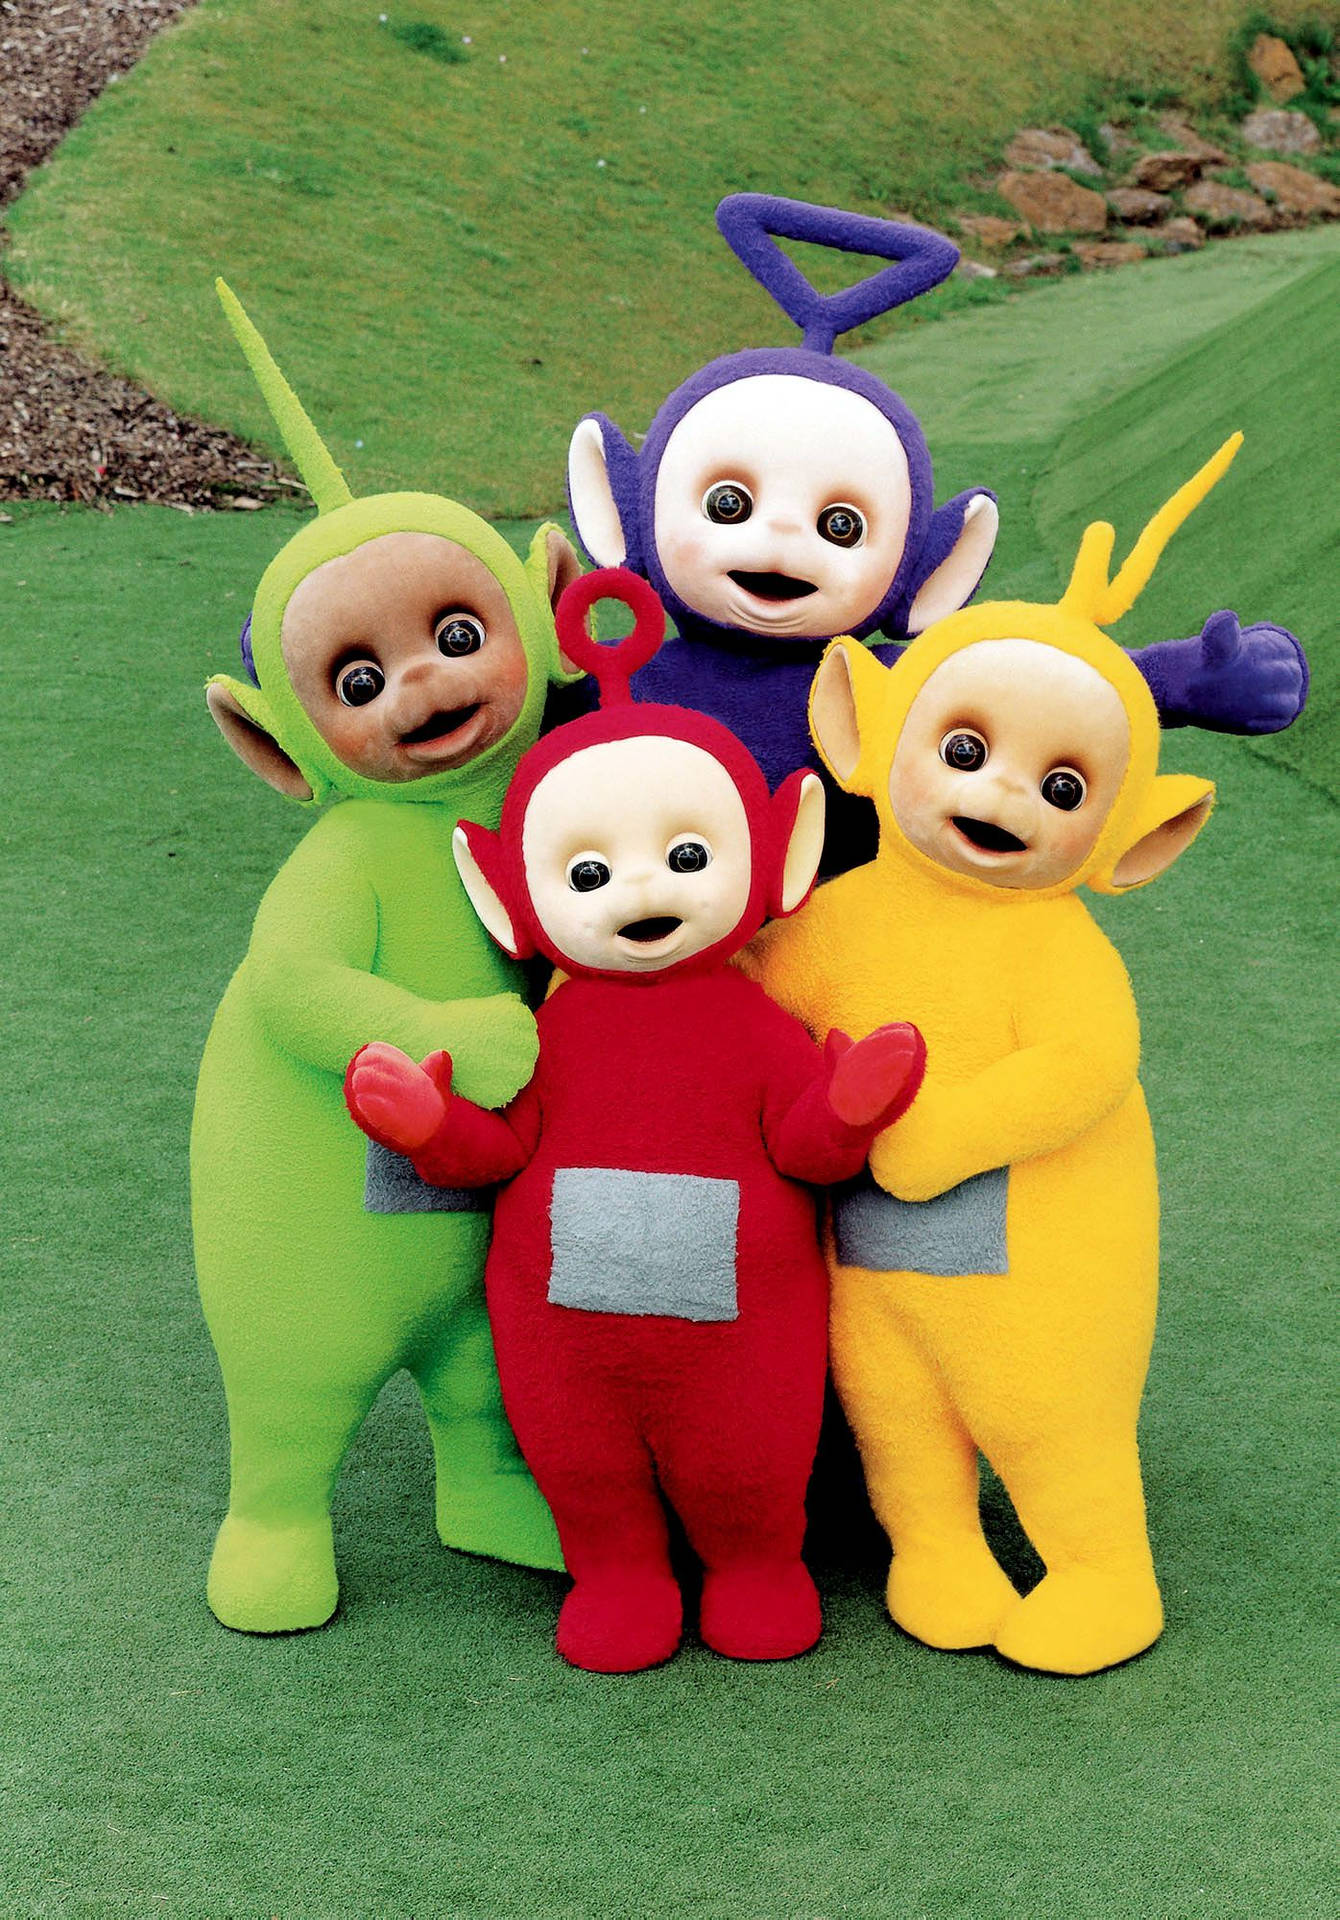 Teletubbies With Po In The Center